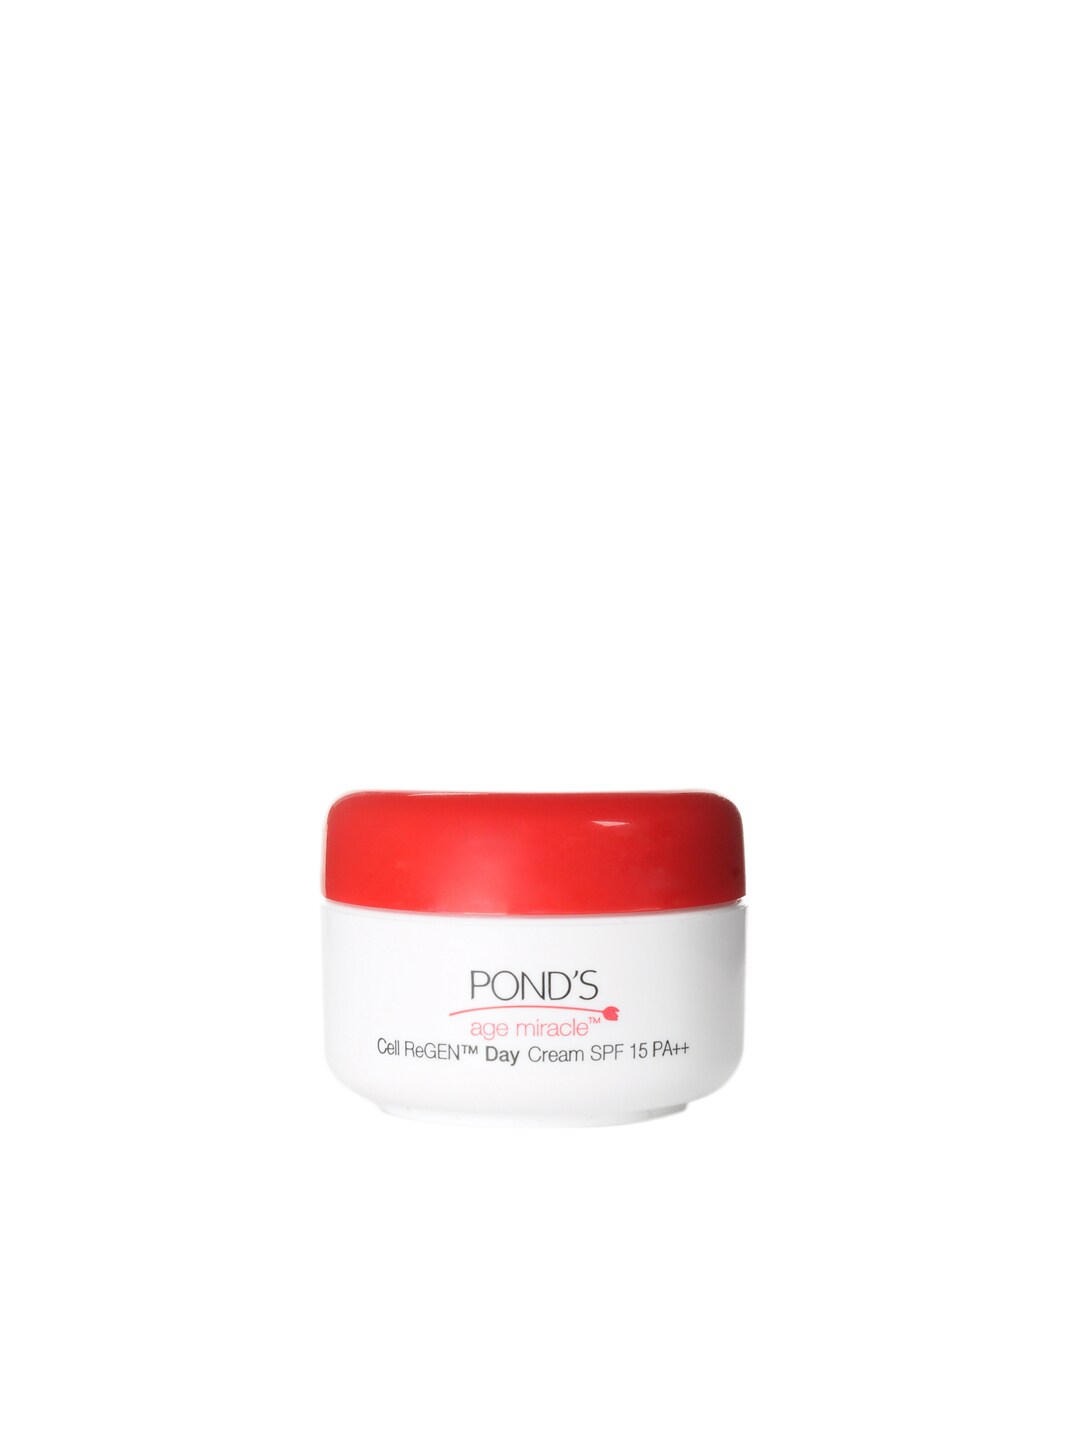 Ponds Age Miracle Cell ReGen Day Cream SPF 15 10 G